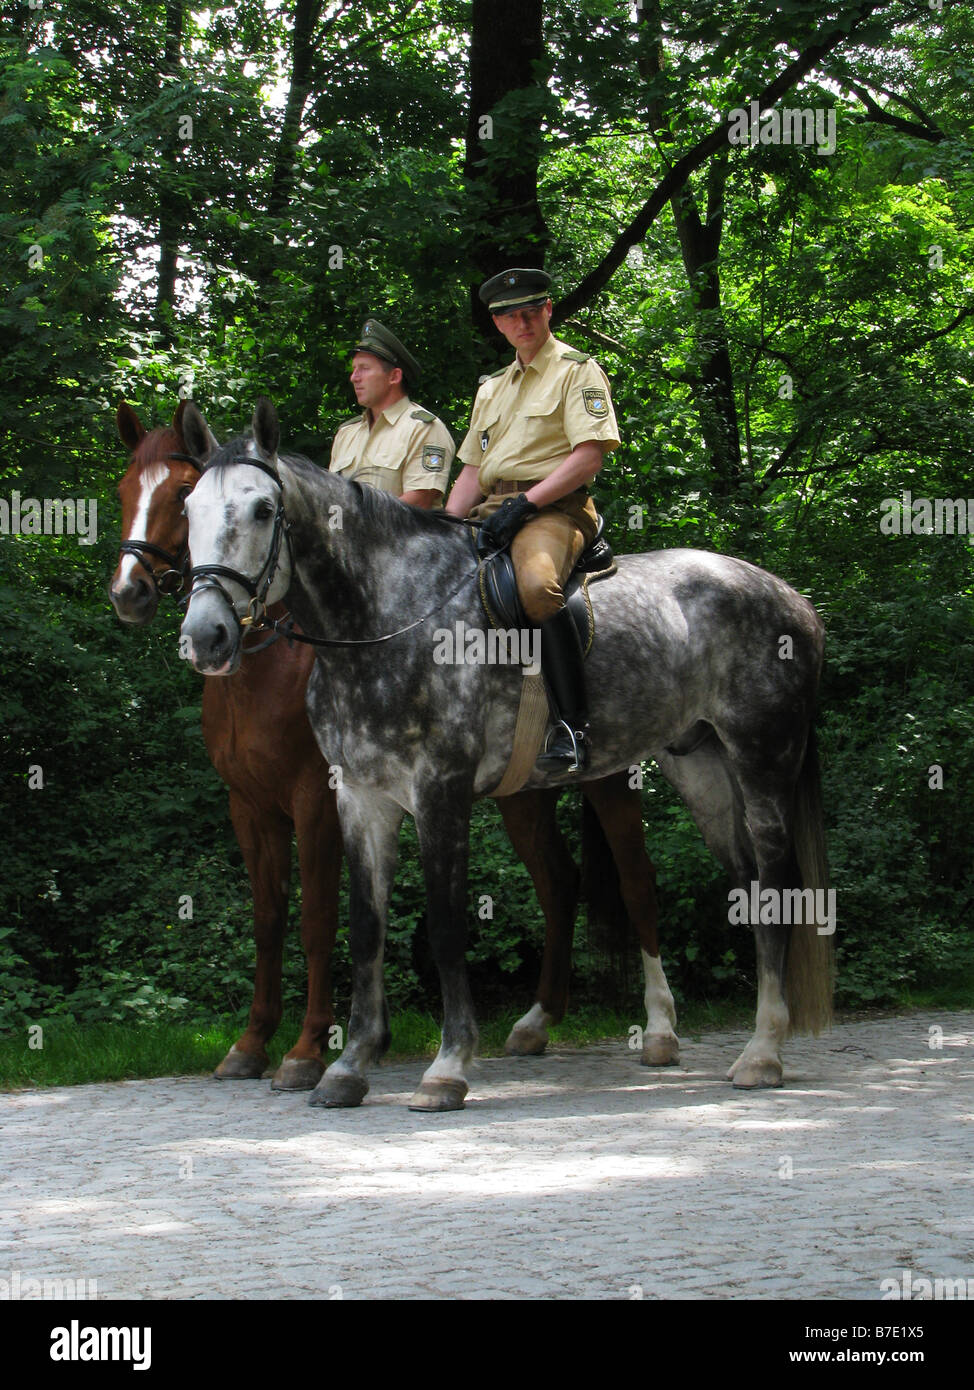 domestic horse (Equus przewalskii f. caballus), Police officers on horseback in the Englisch Garden, Germany, Bavaria, Muenchen Stock Photo